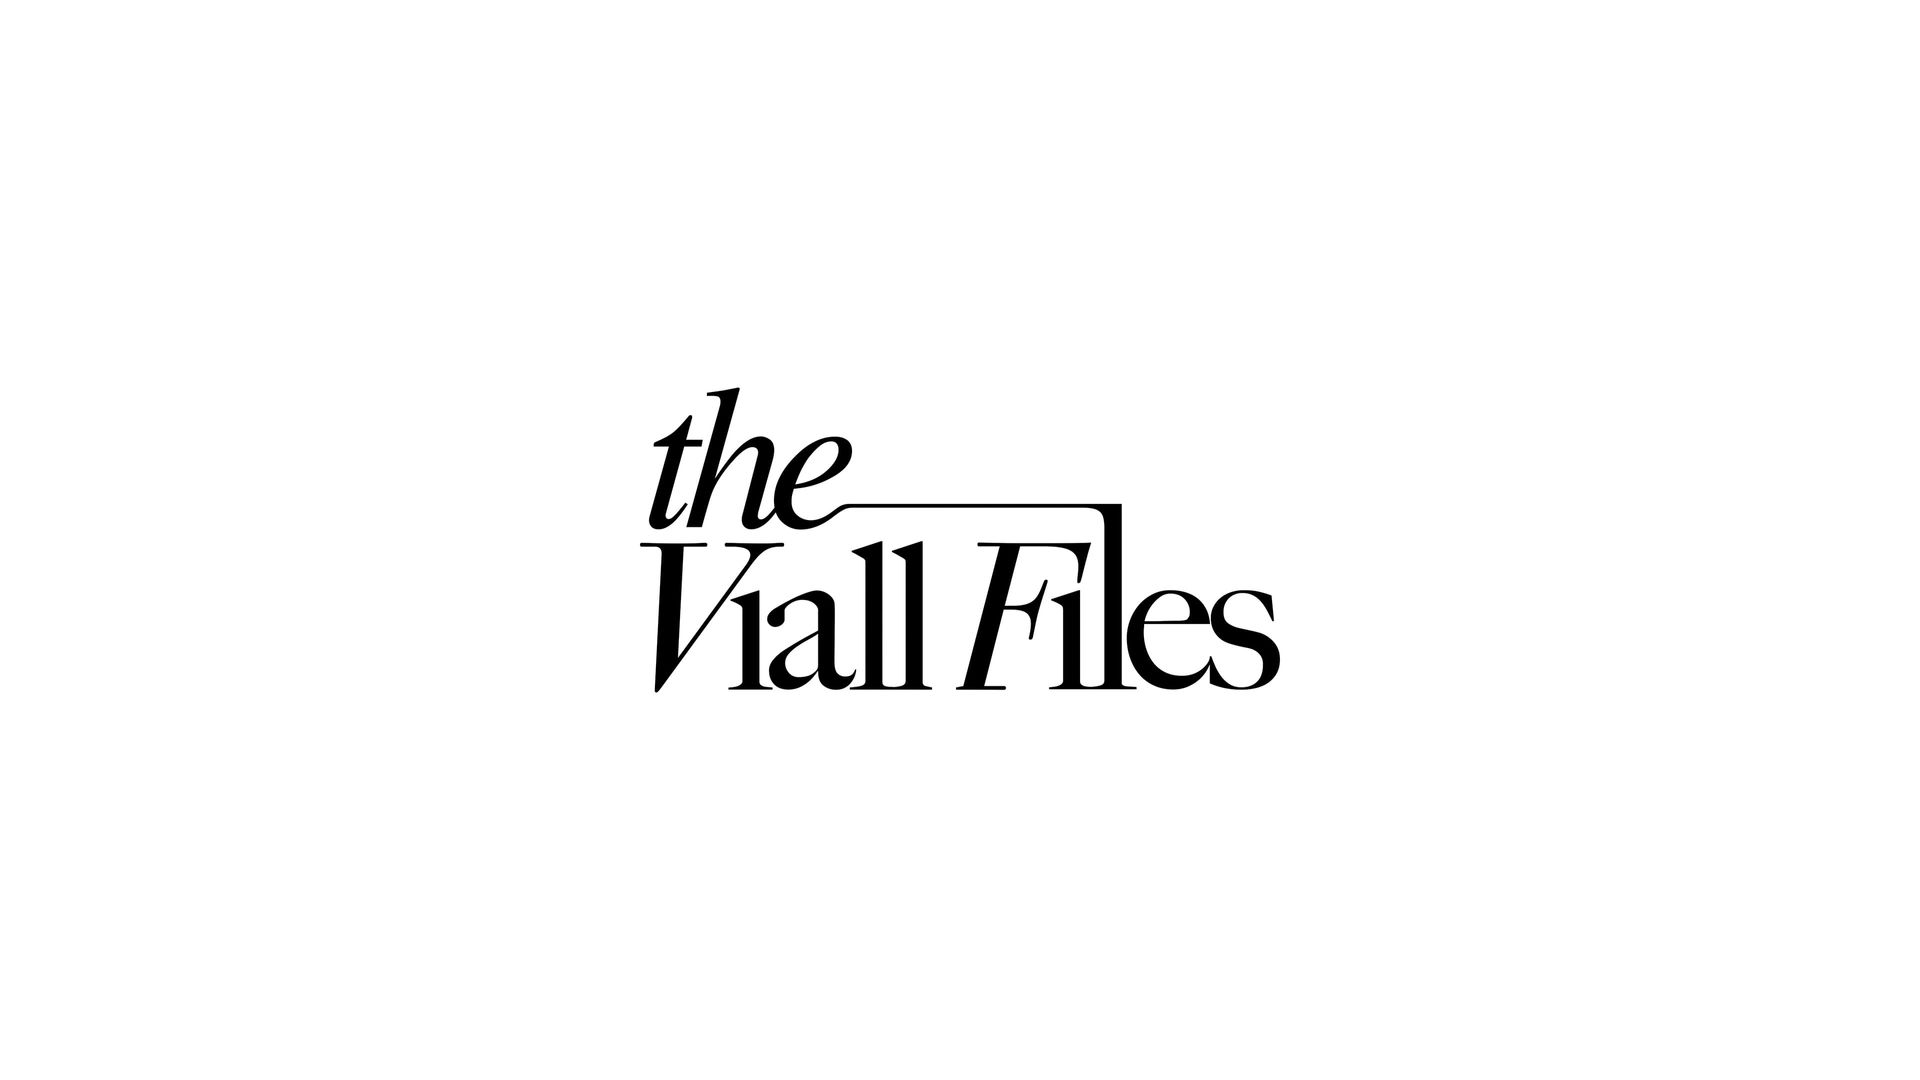 The Viall Files background